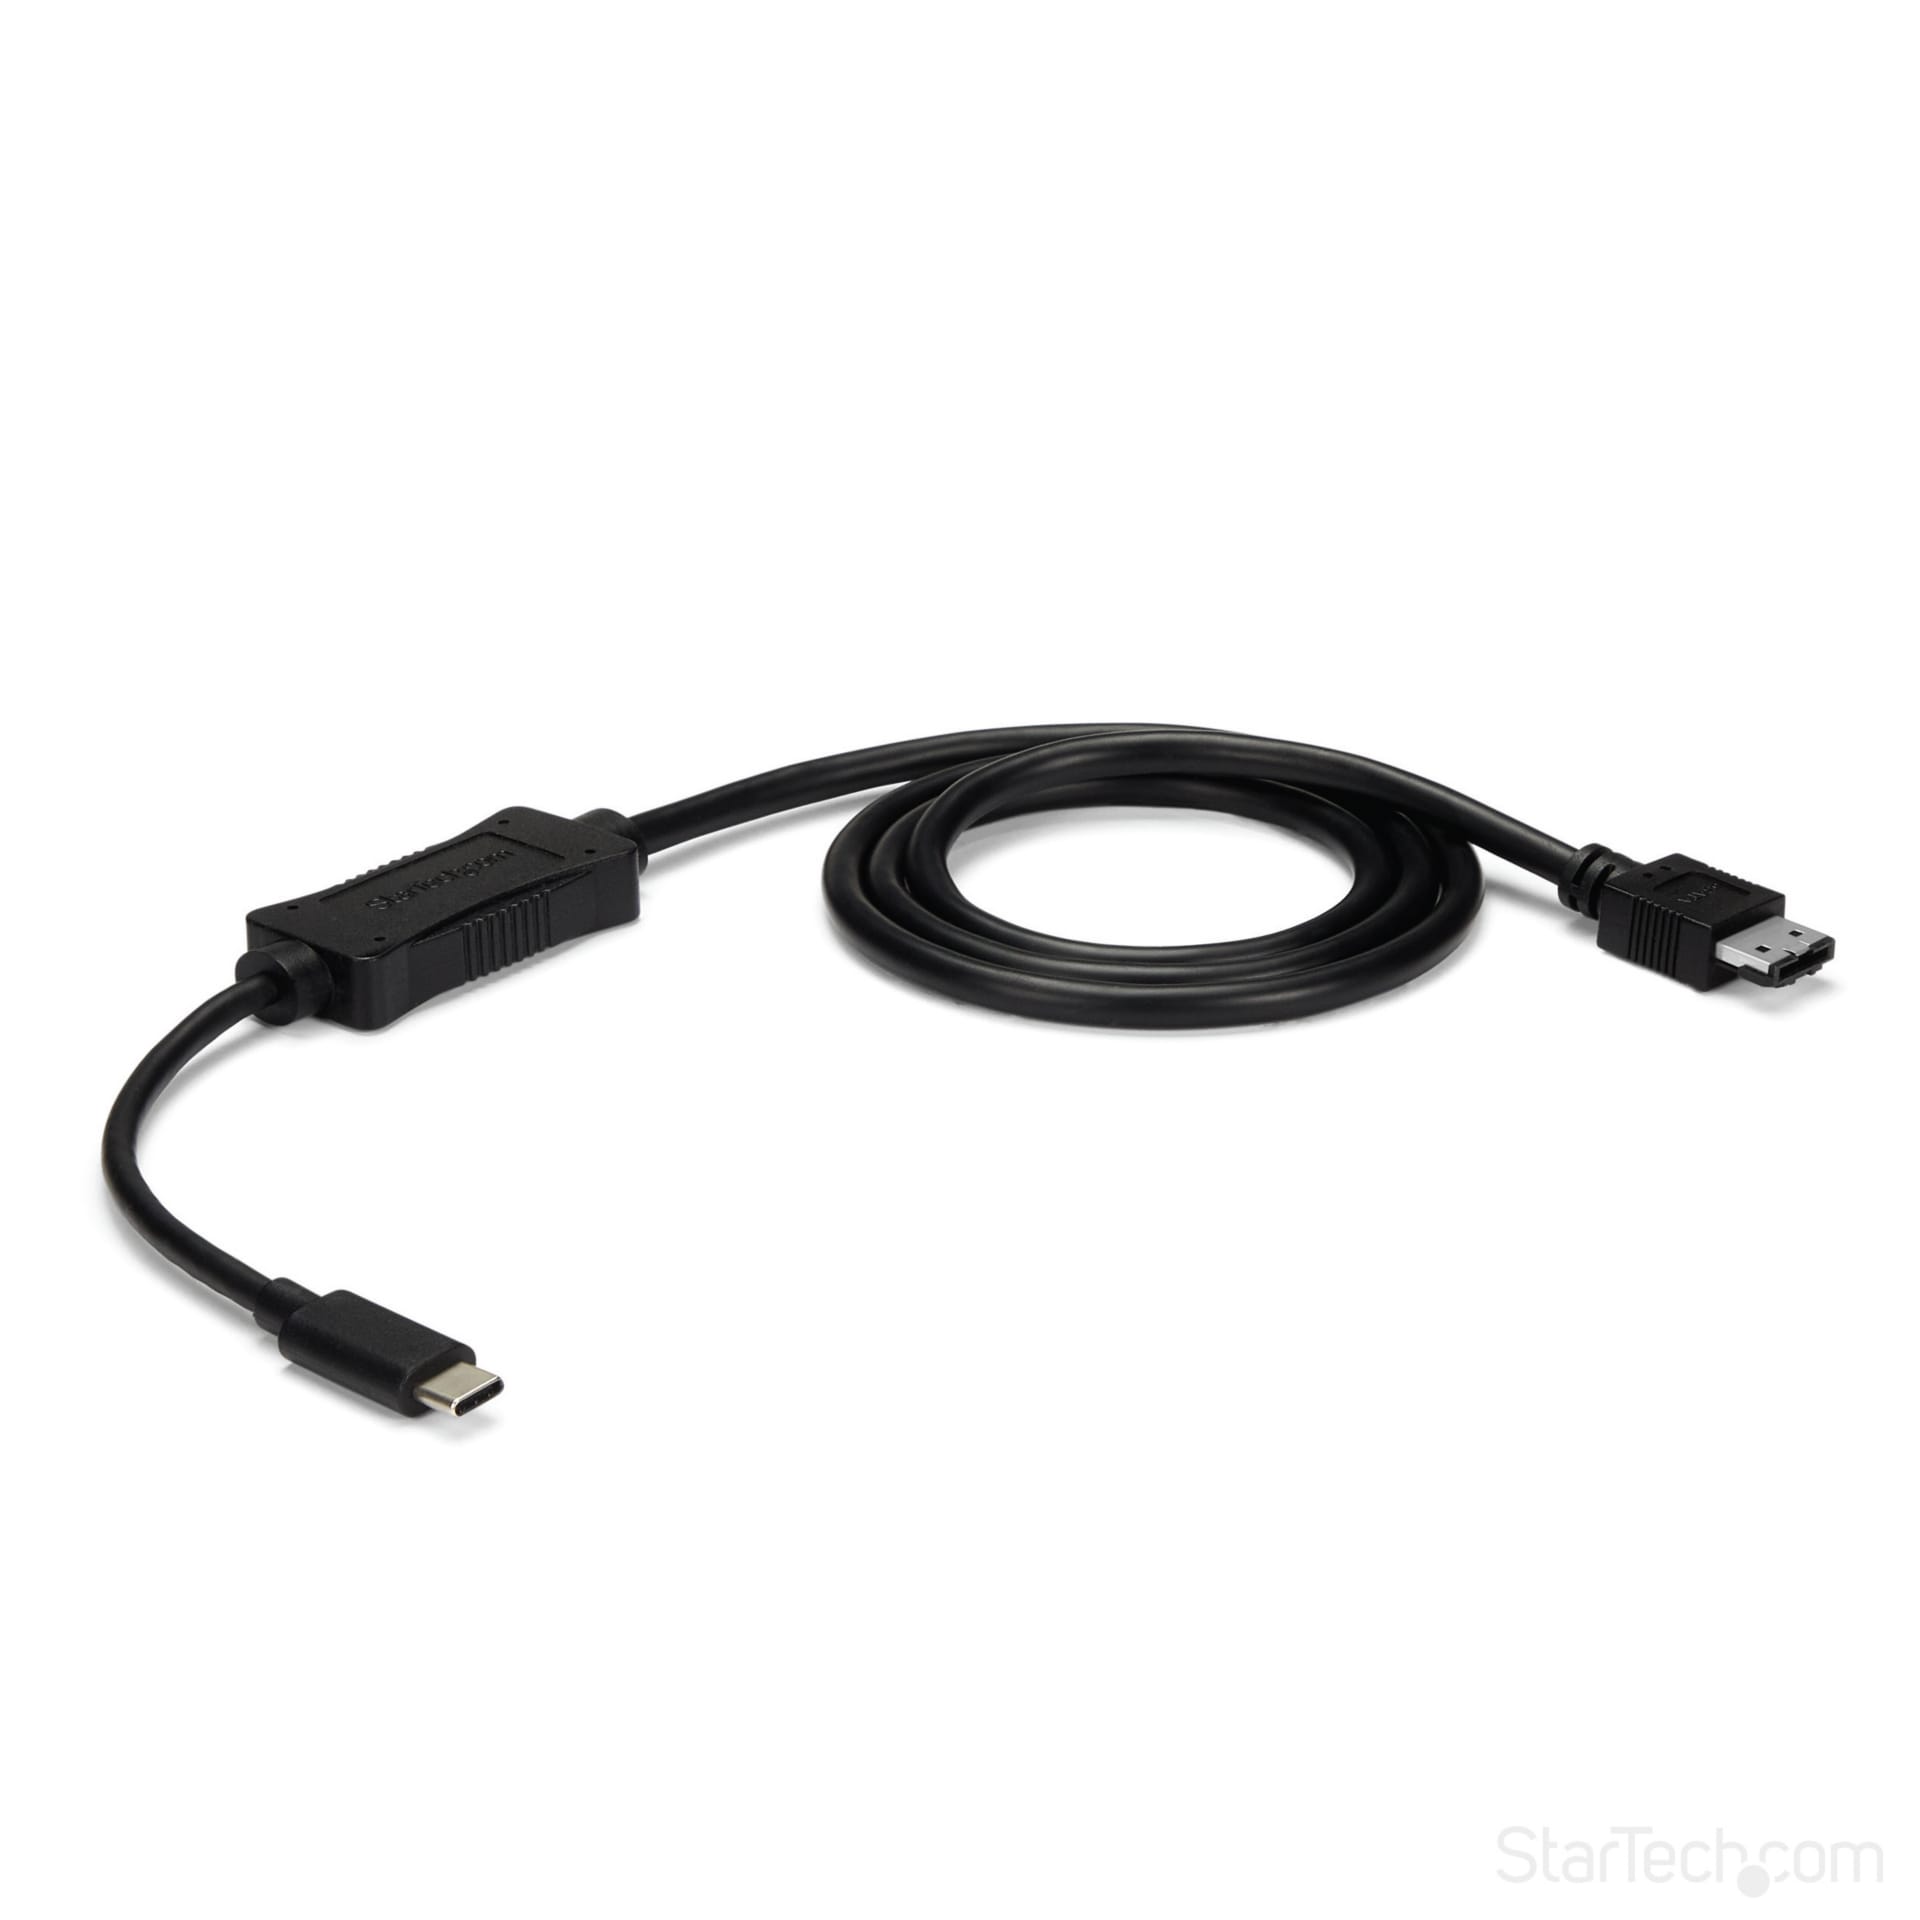 StarTech.com 3 ft 1m USB C to eSATA Cable - For External Storage Devices with HDD / SSD / ODD - USB 3.0 to eSATA Cable